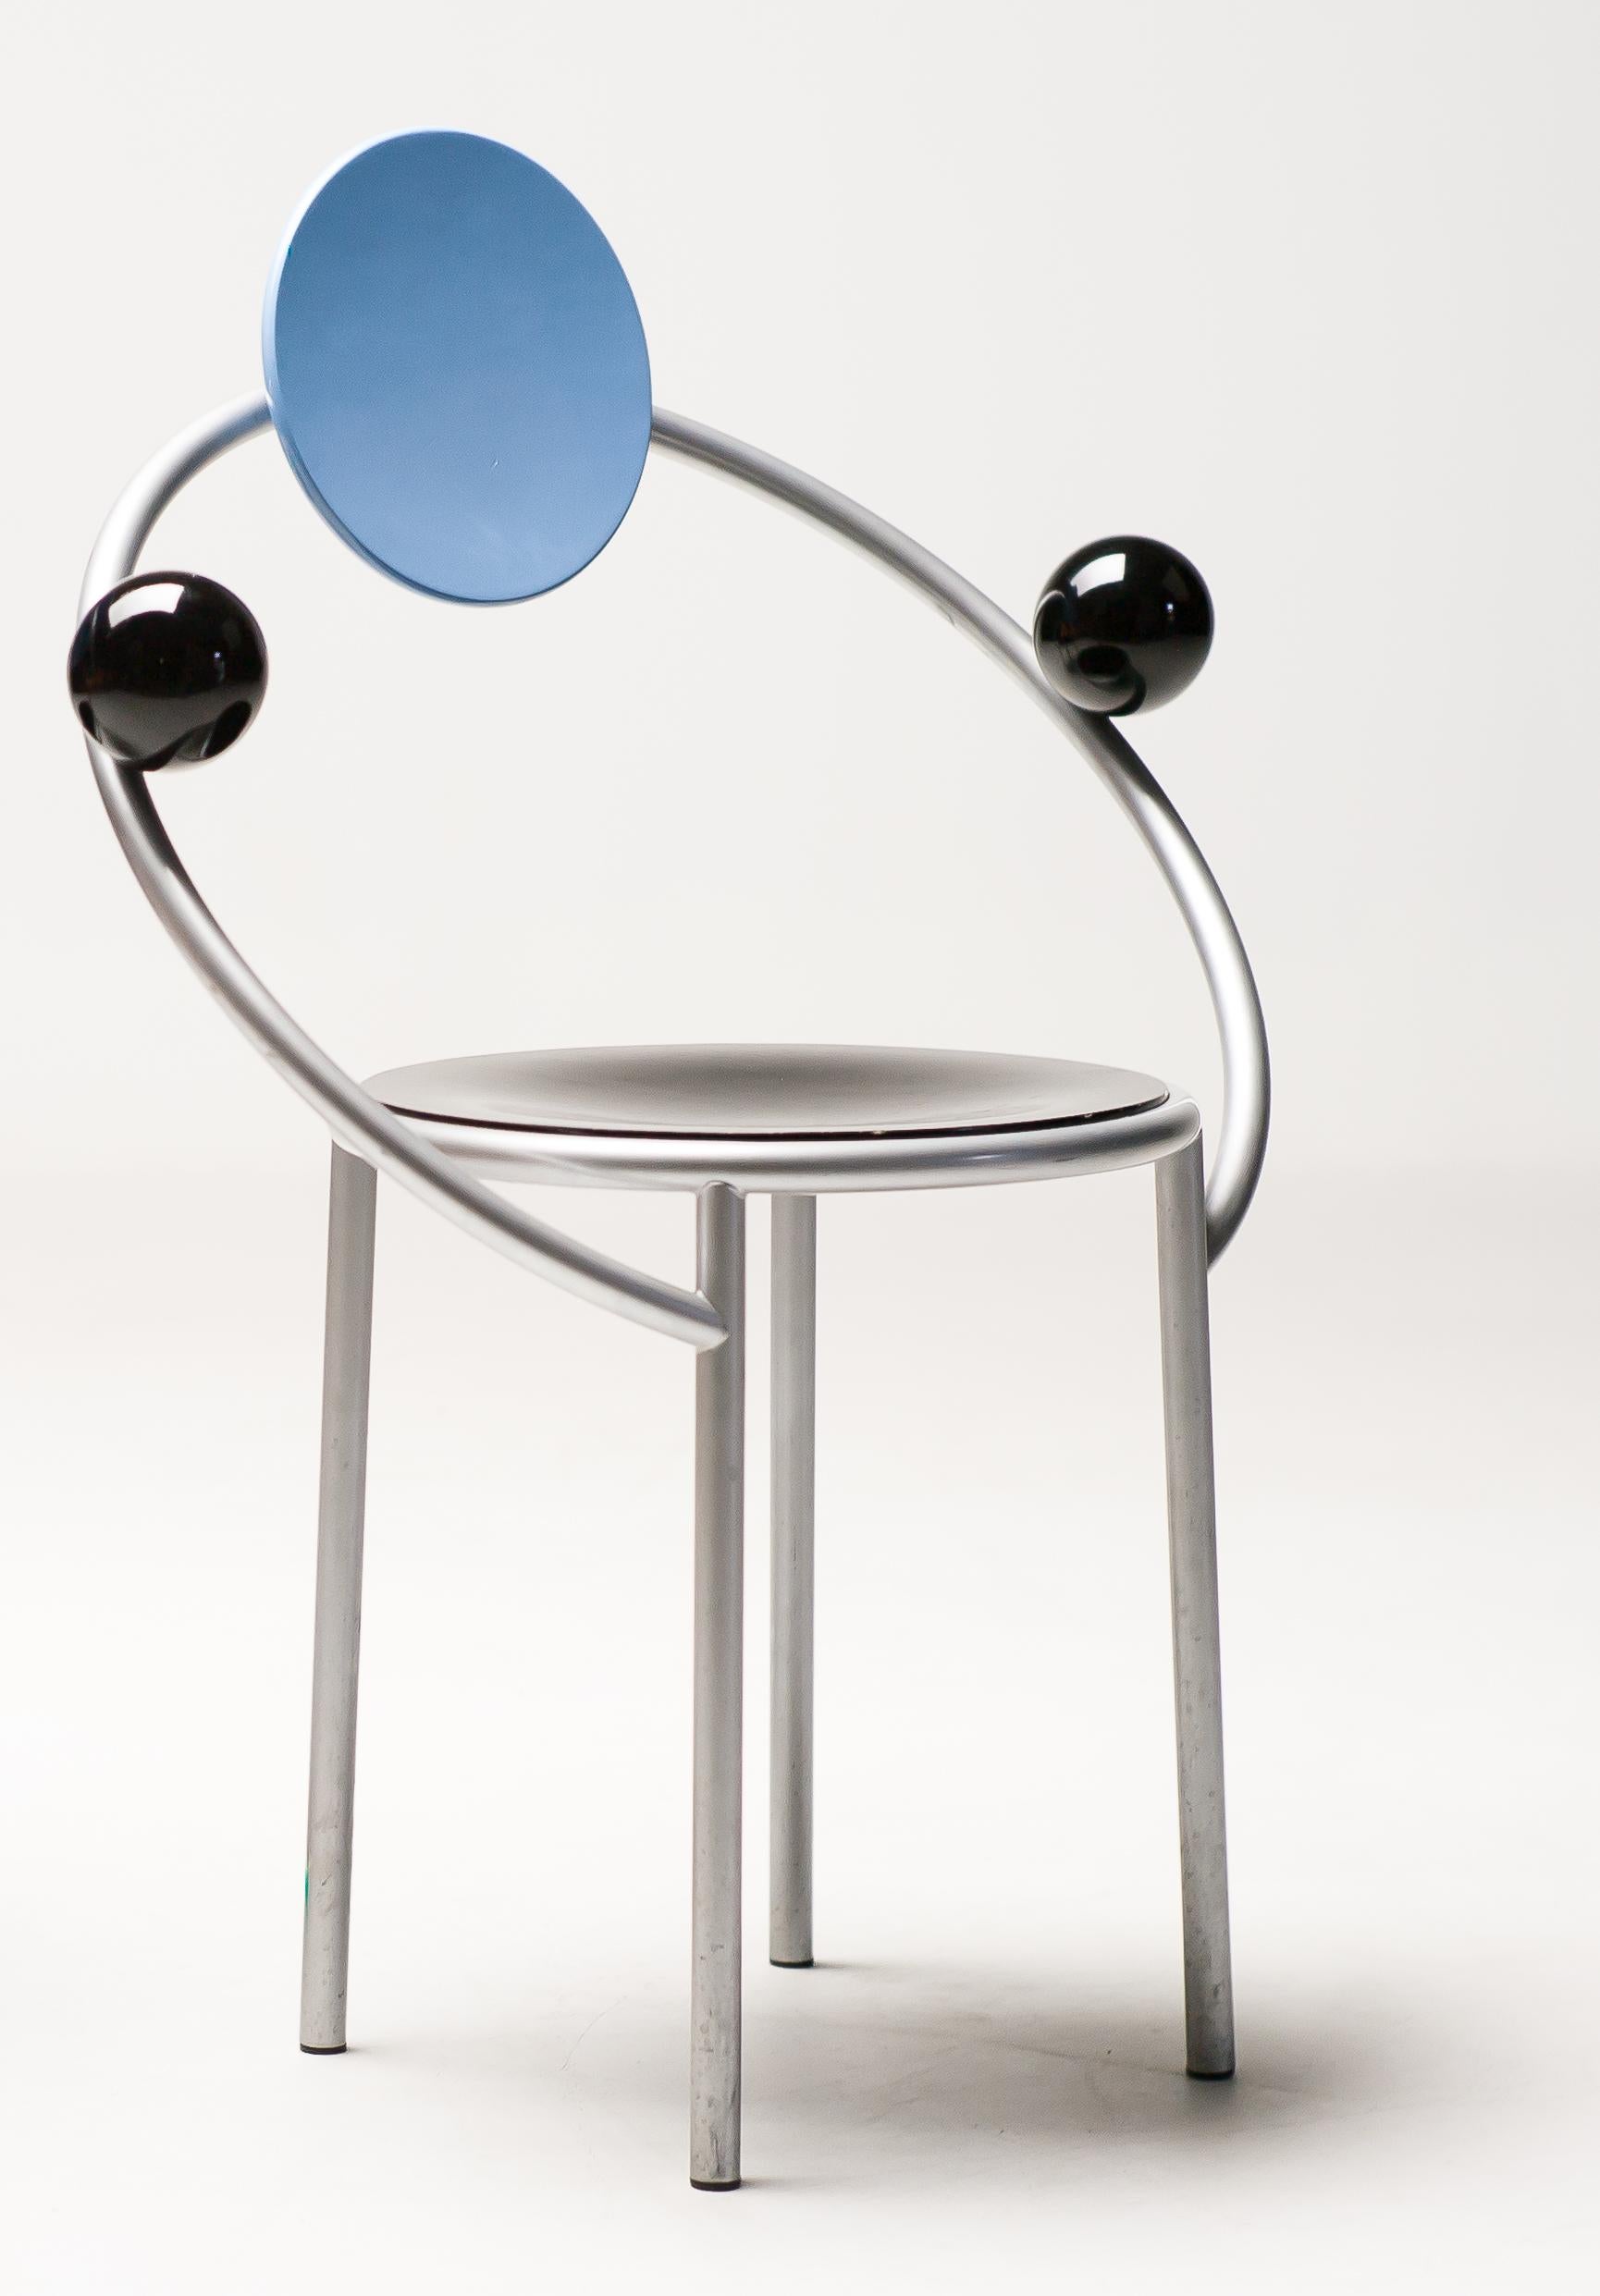 First chair by Michele De Lucchi for Memphis Milano, 1983.
Marked with stamp underneath the seat.